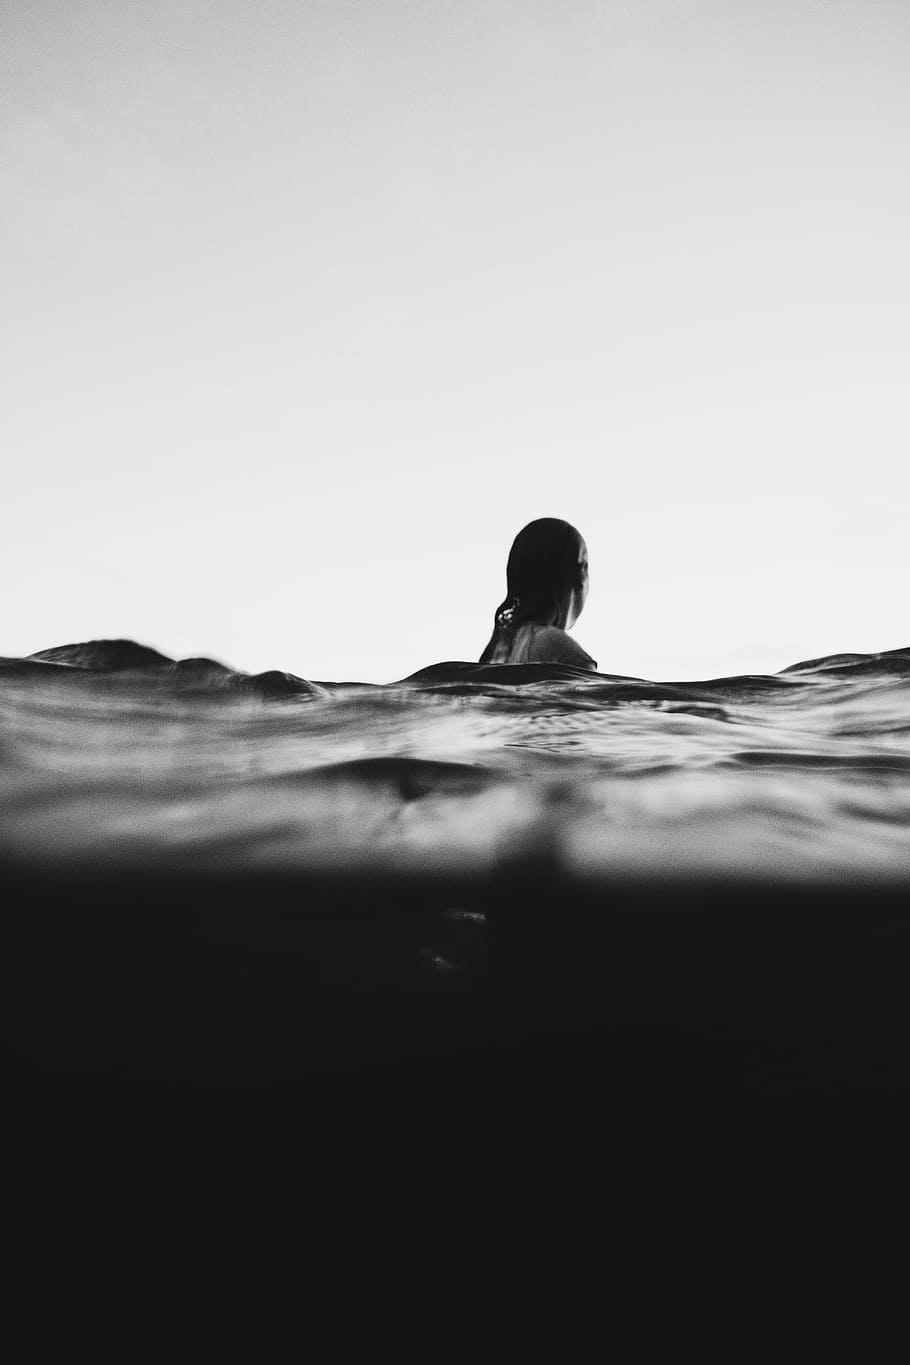 woman on body of water, selective focus photo of woman swimming